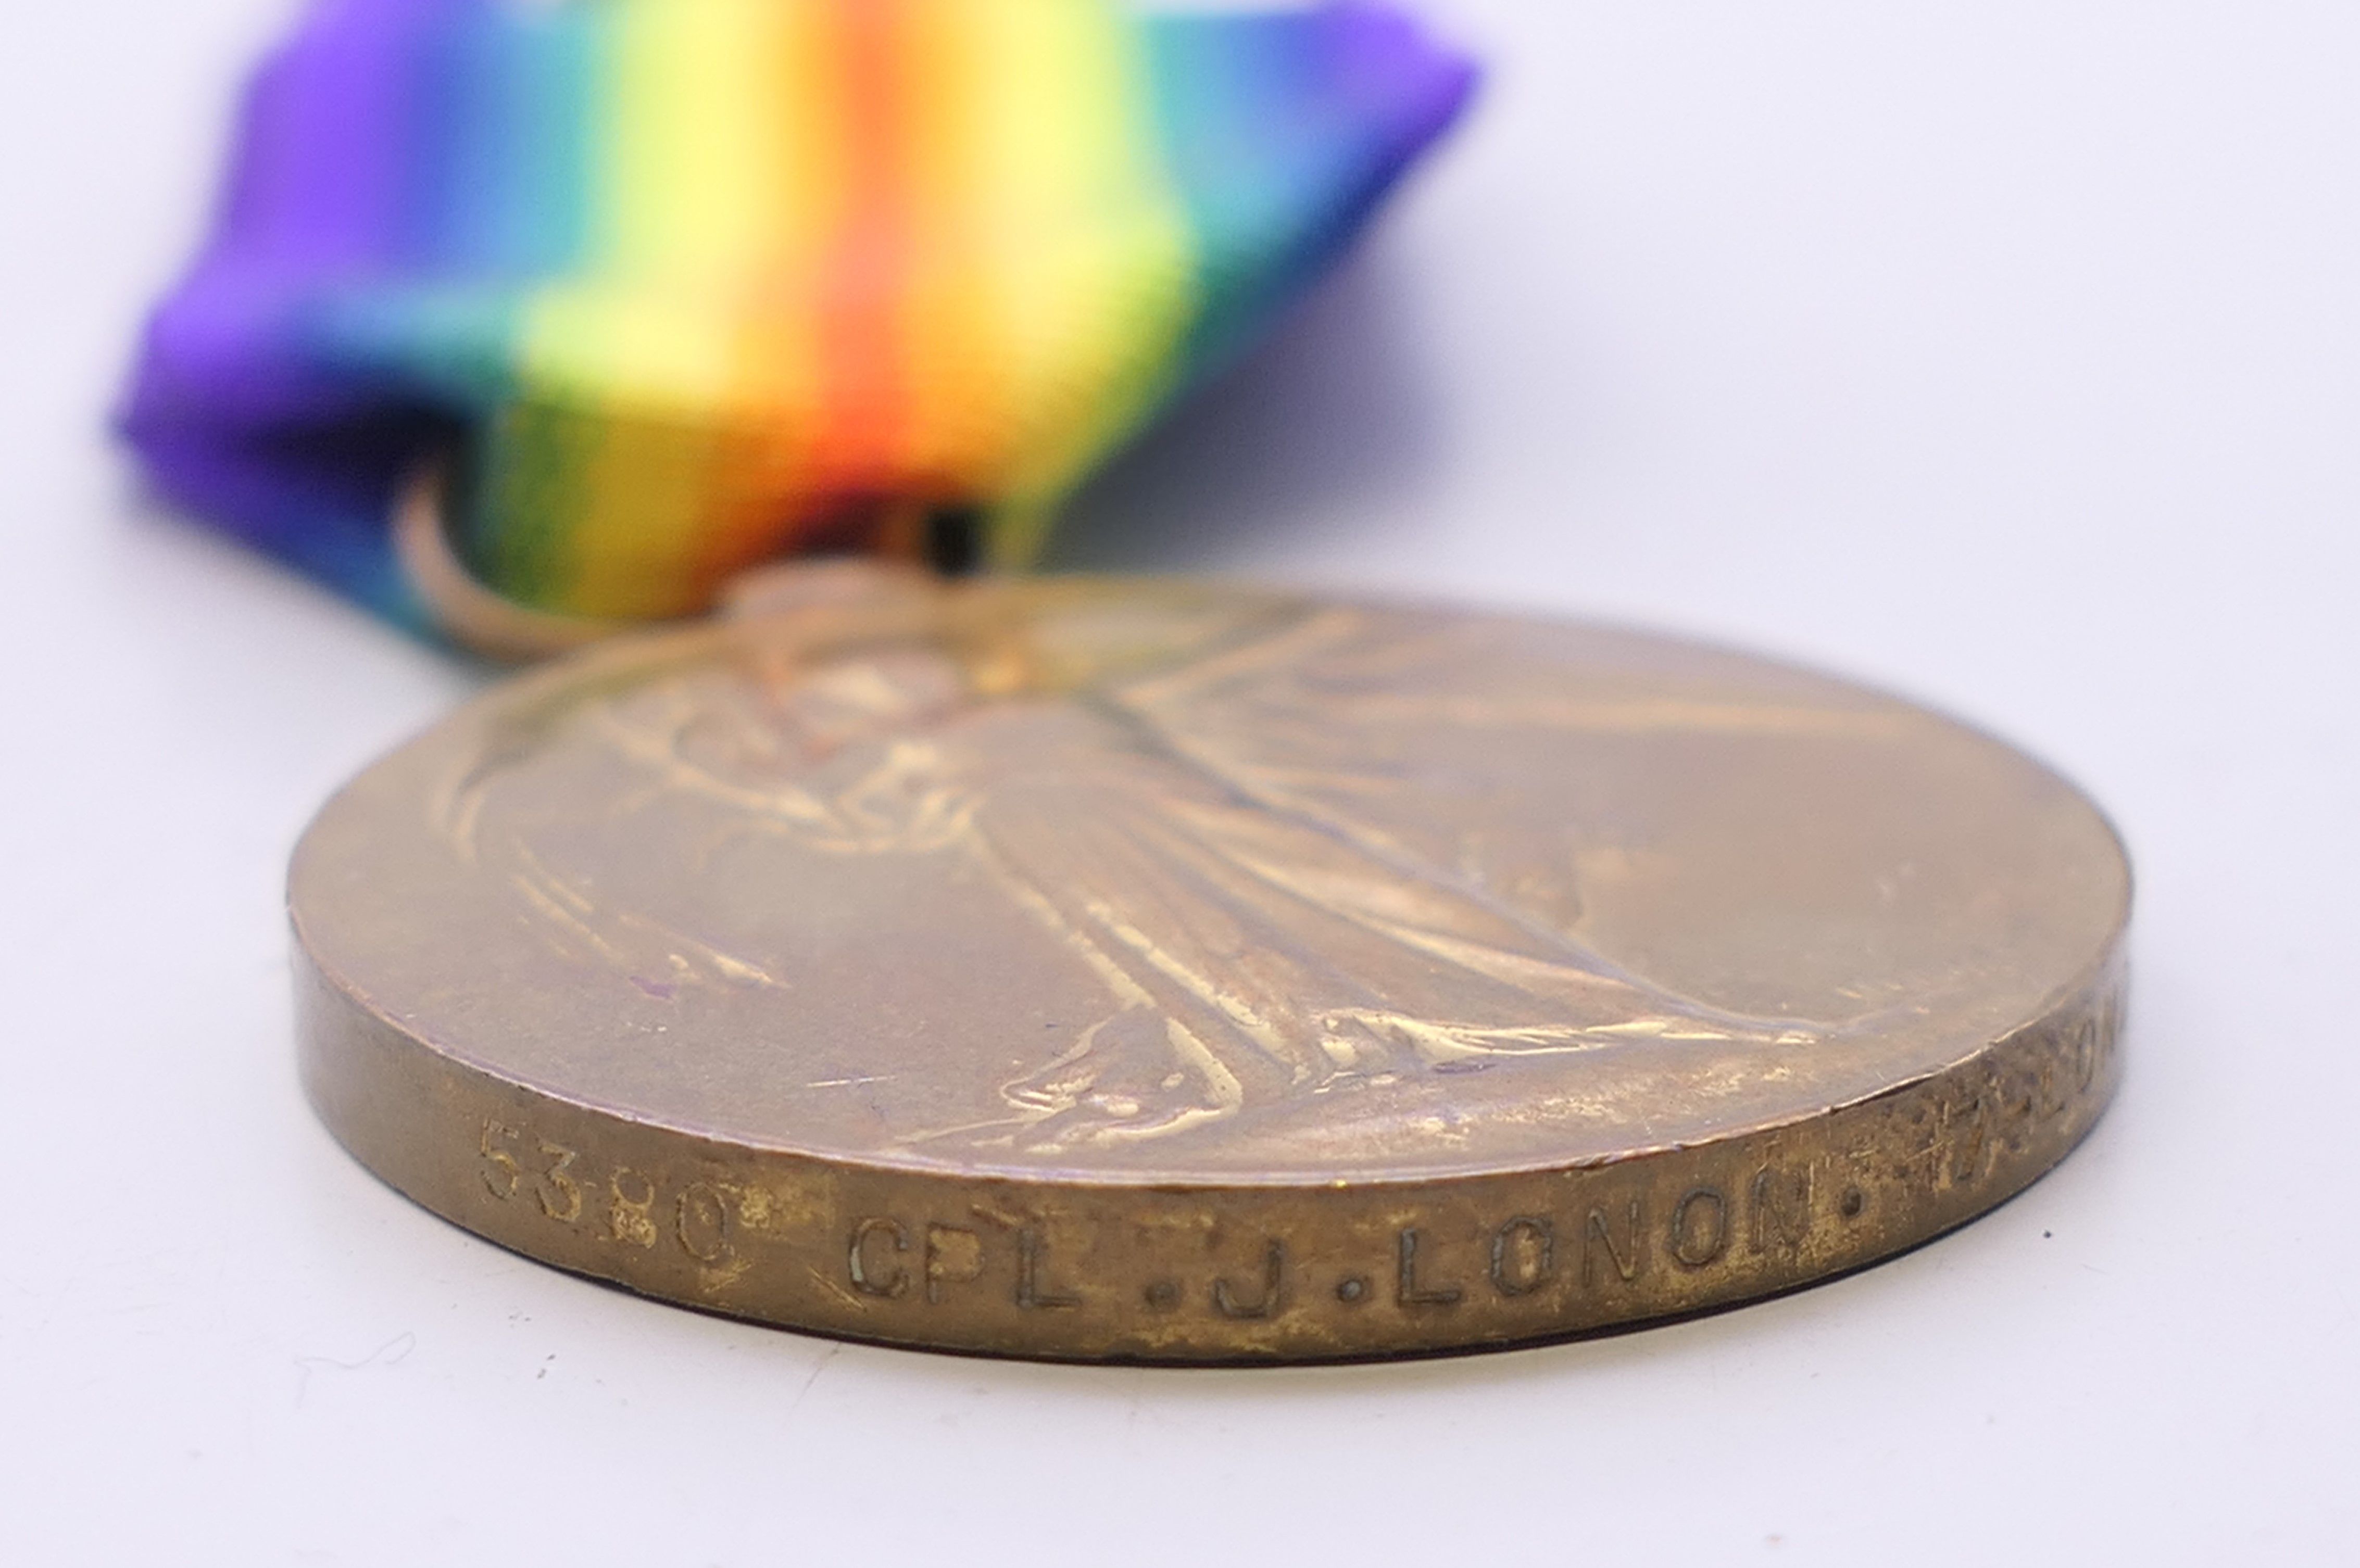 Two WWI medals, including the Victory Medal named to 5380 CPL J Lonon 7-LOND.R. - Image 11 of 11